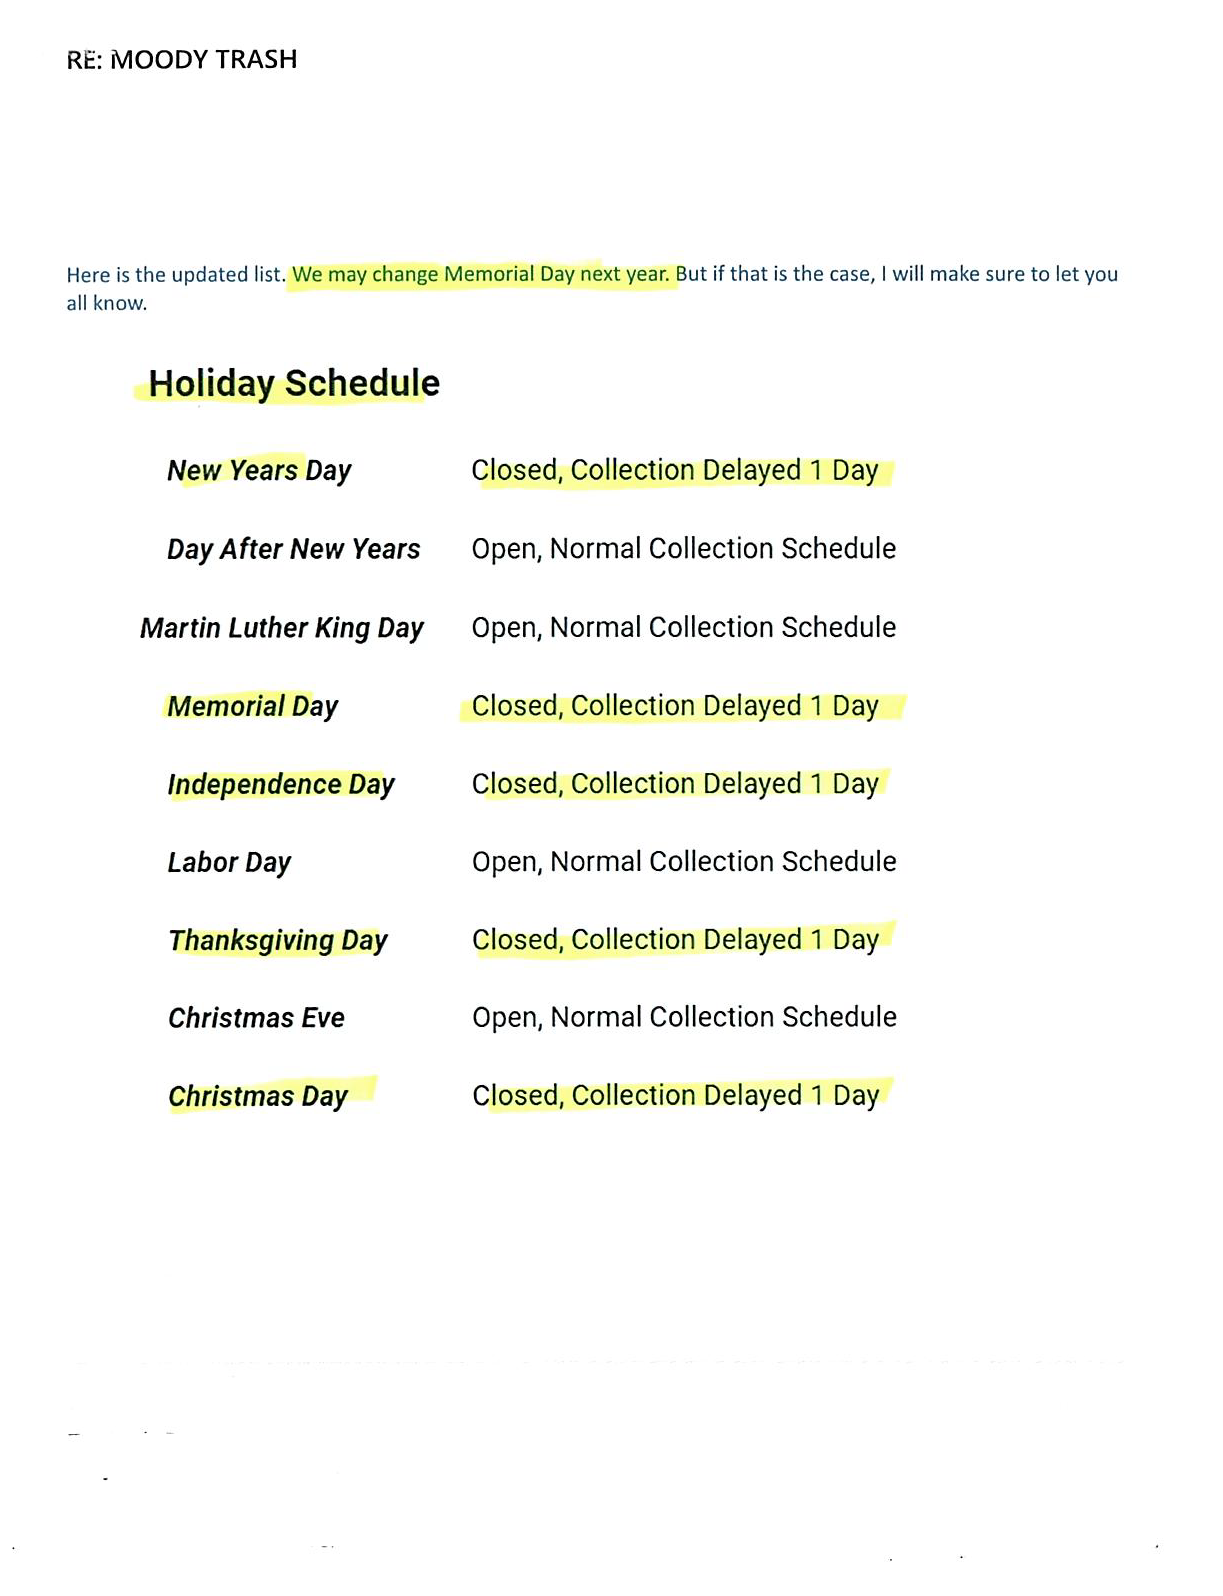 WASTE CONNECTIONS HOLIDAY SCHEDULE FOR TRASH PICK/UP ALSO WHAT IS ACCEPTABLE PICK UP & NOT